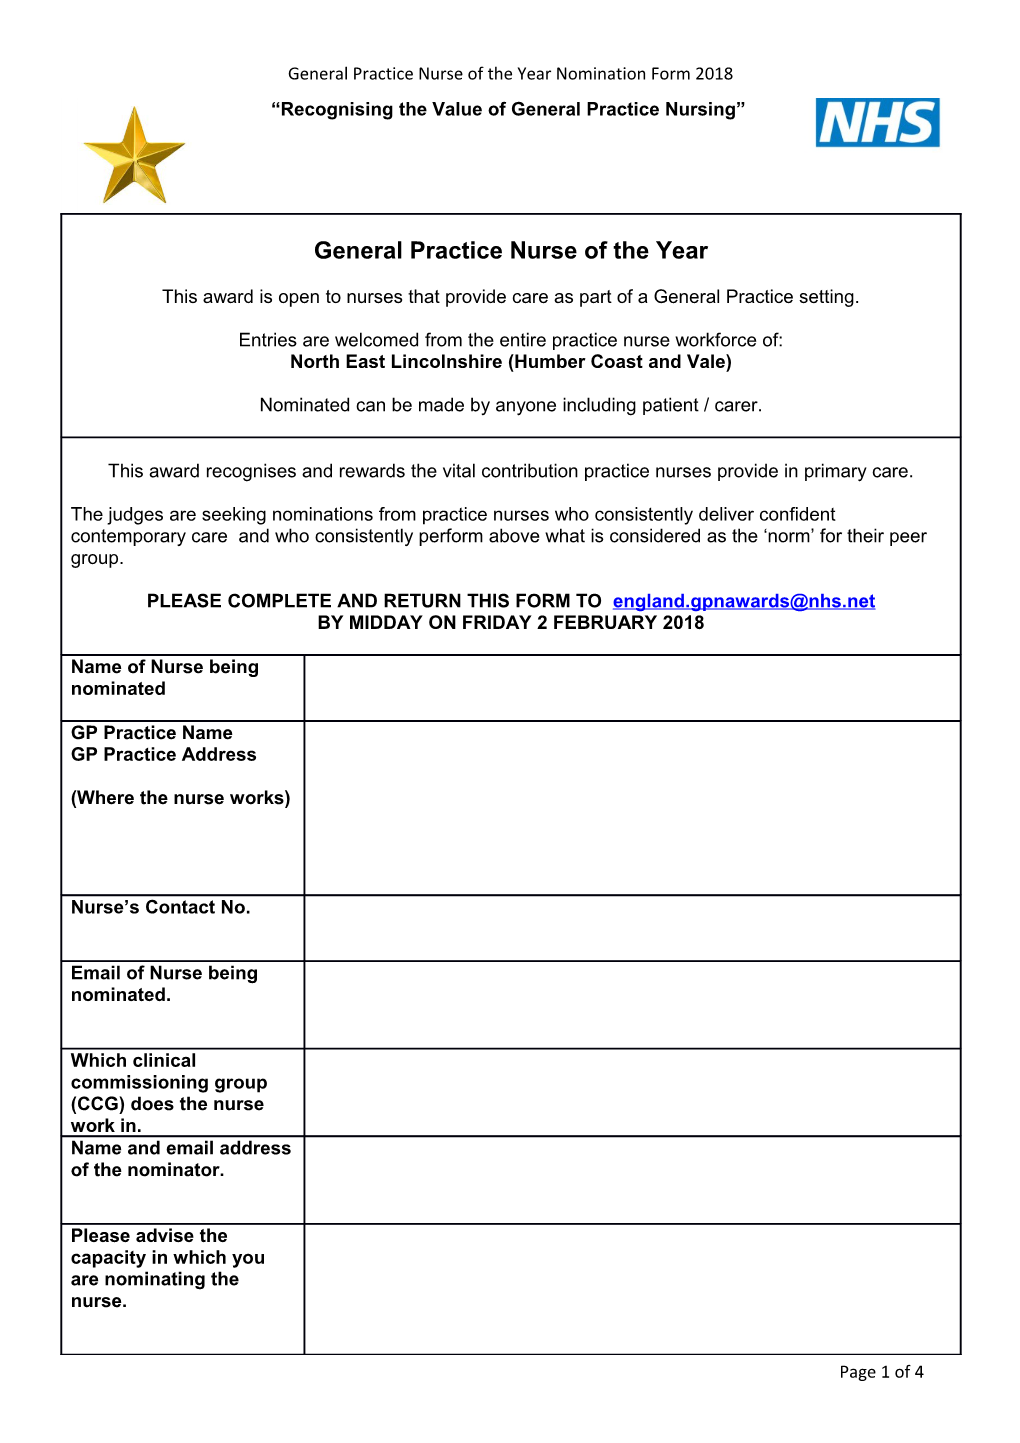 General Practice Nurse of the Year Nomination Form 2018